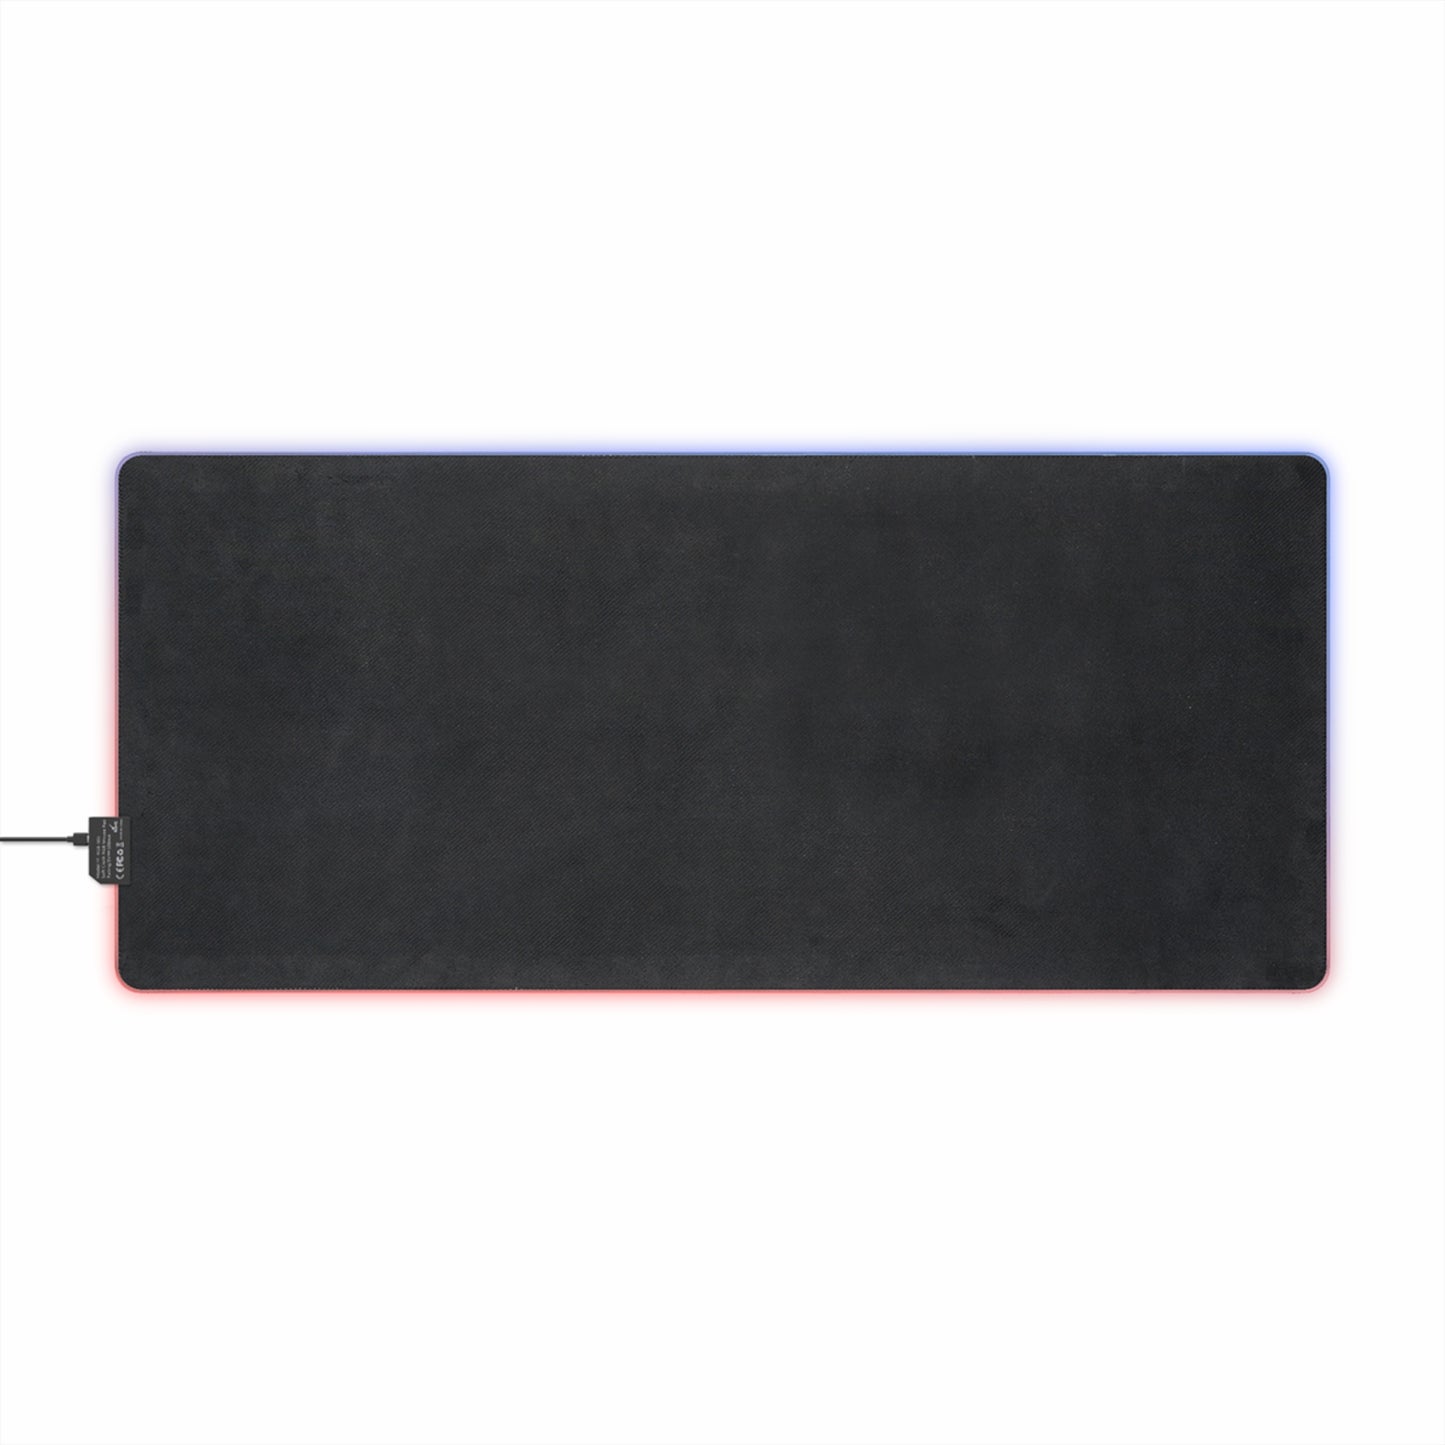 CLMP-8 LED Gaming Mouse Pad